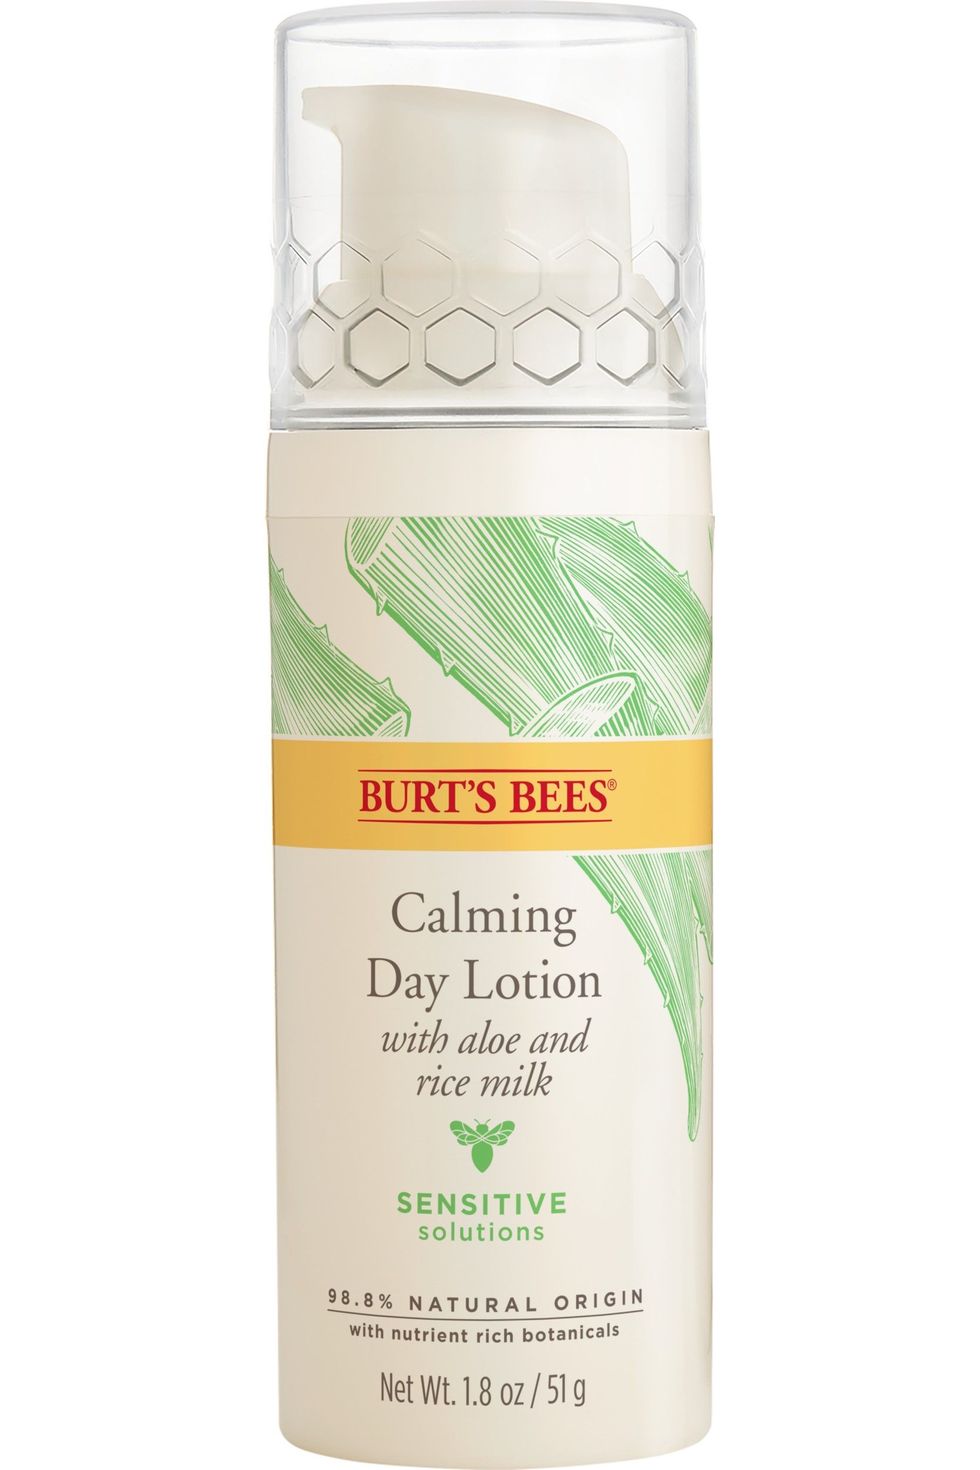 Burt's Bees Sensitive Solutions Calming Day Lotion